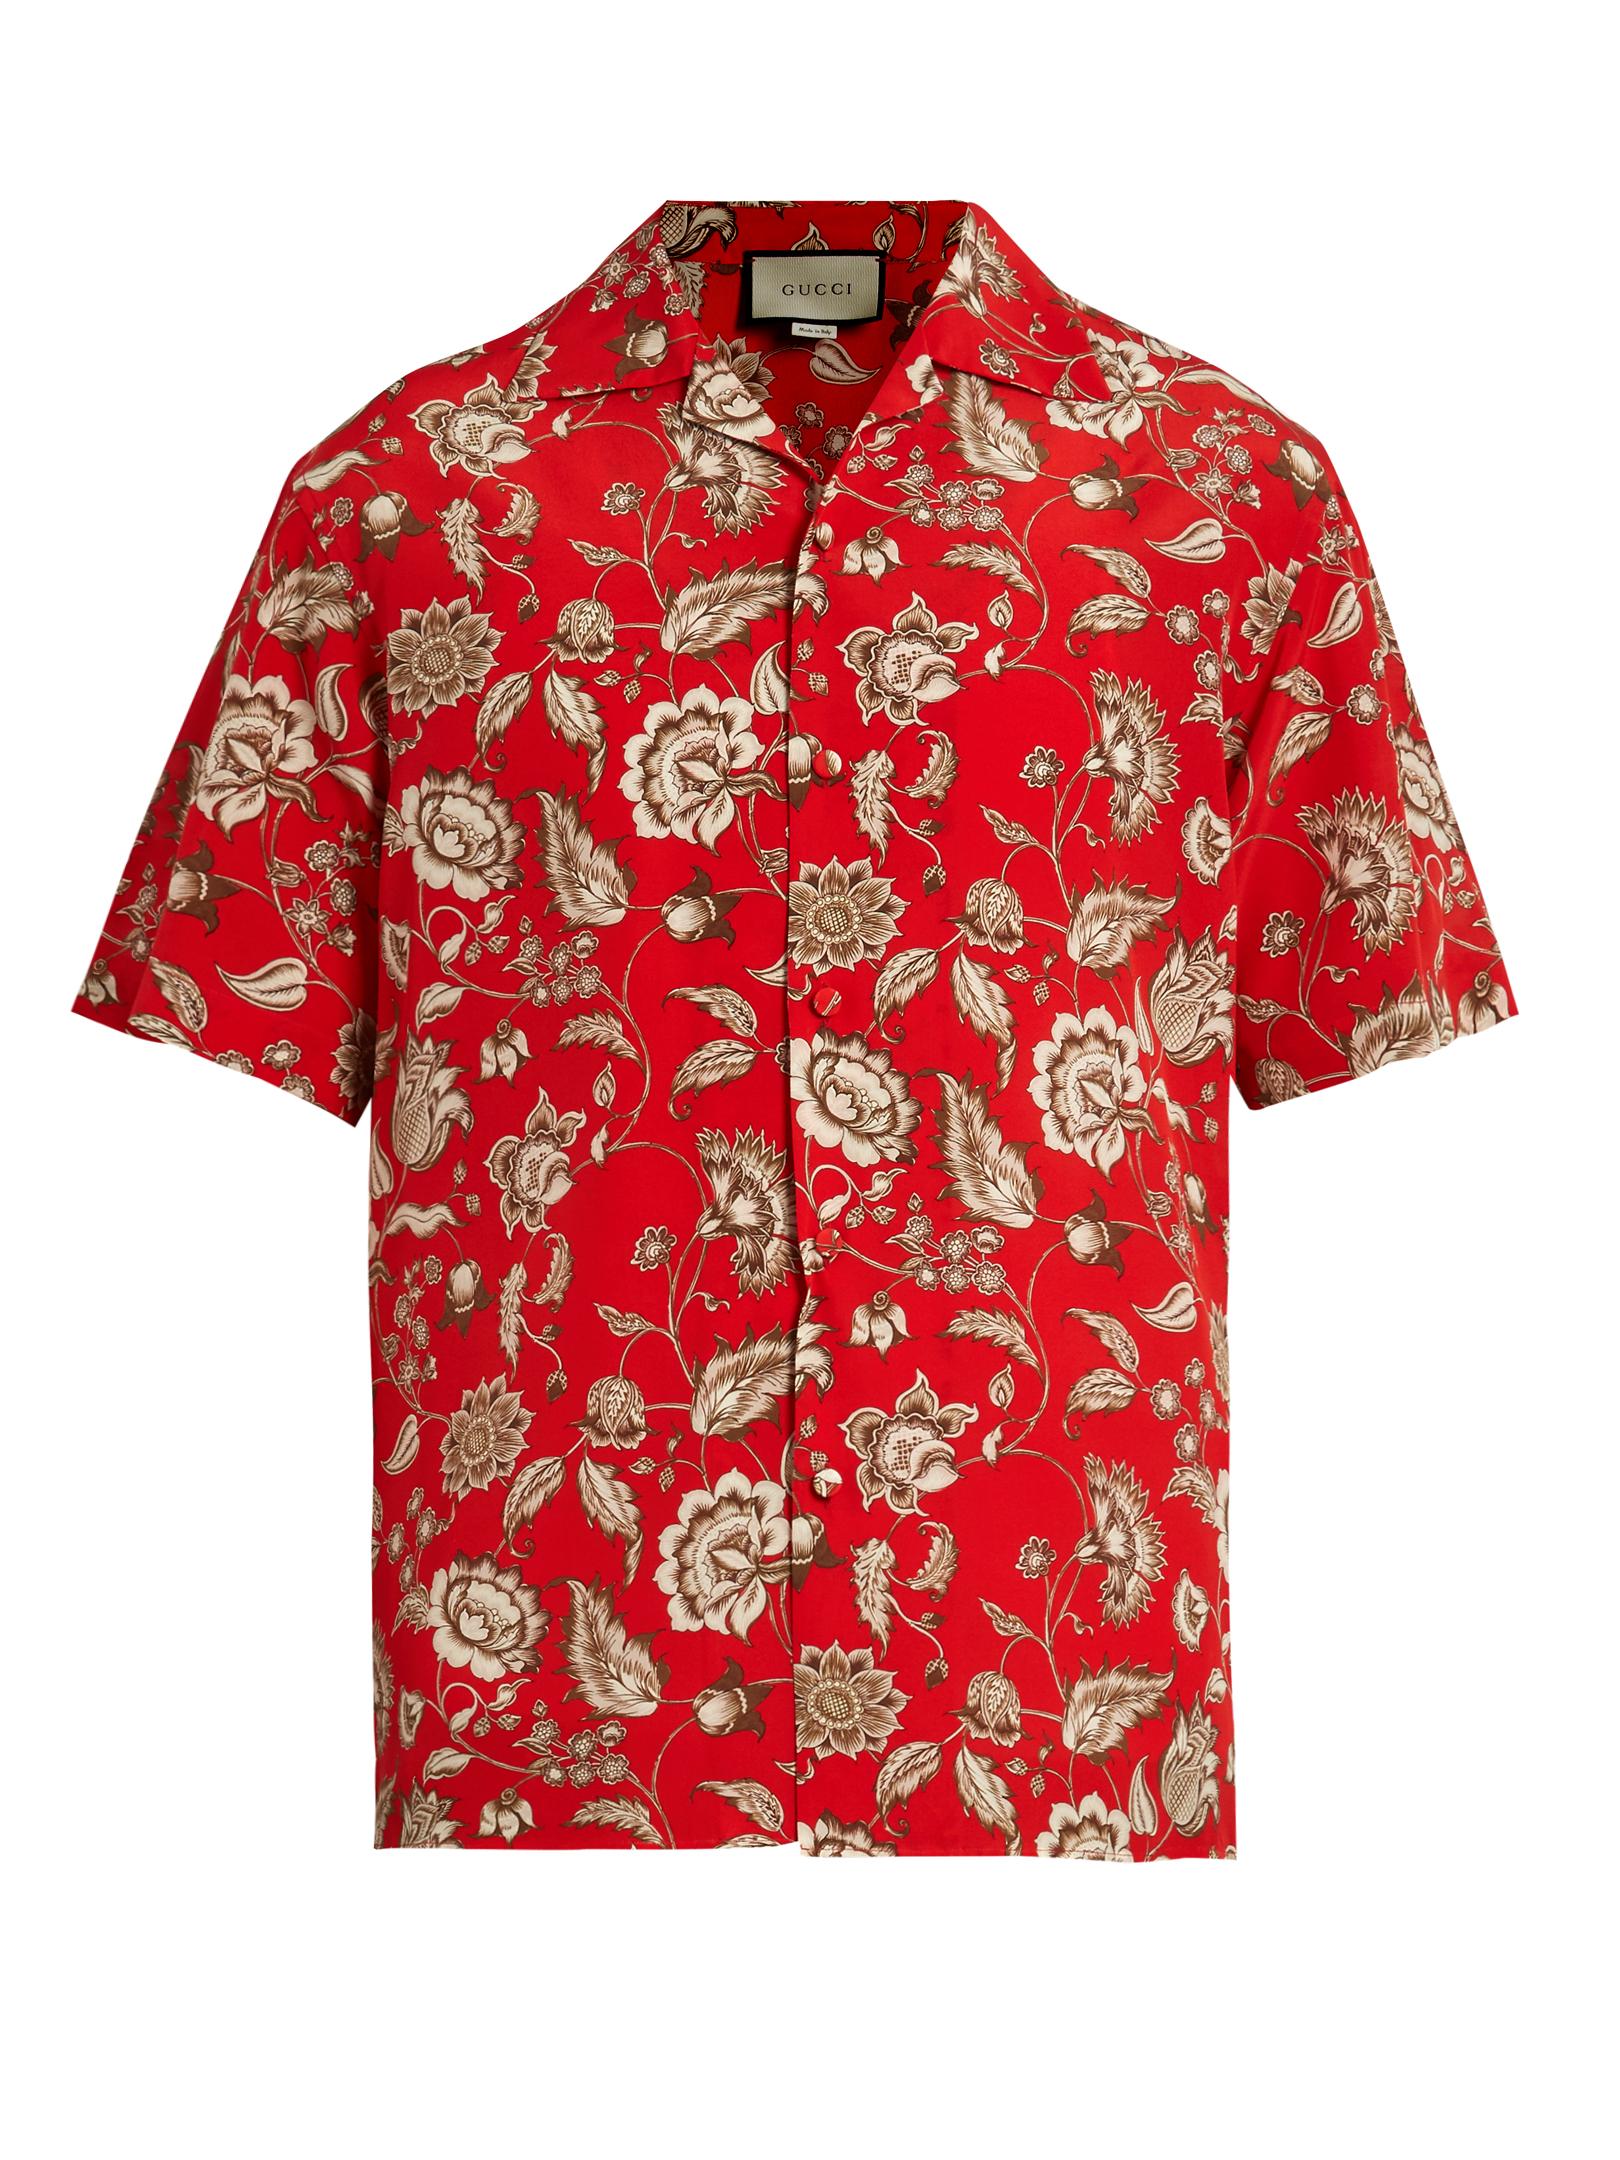 Lyst - Gucci Camp-collar Floral-print Silk Shirt in Red for Men